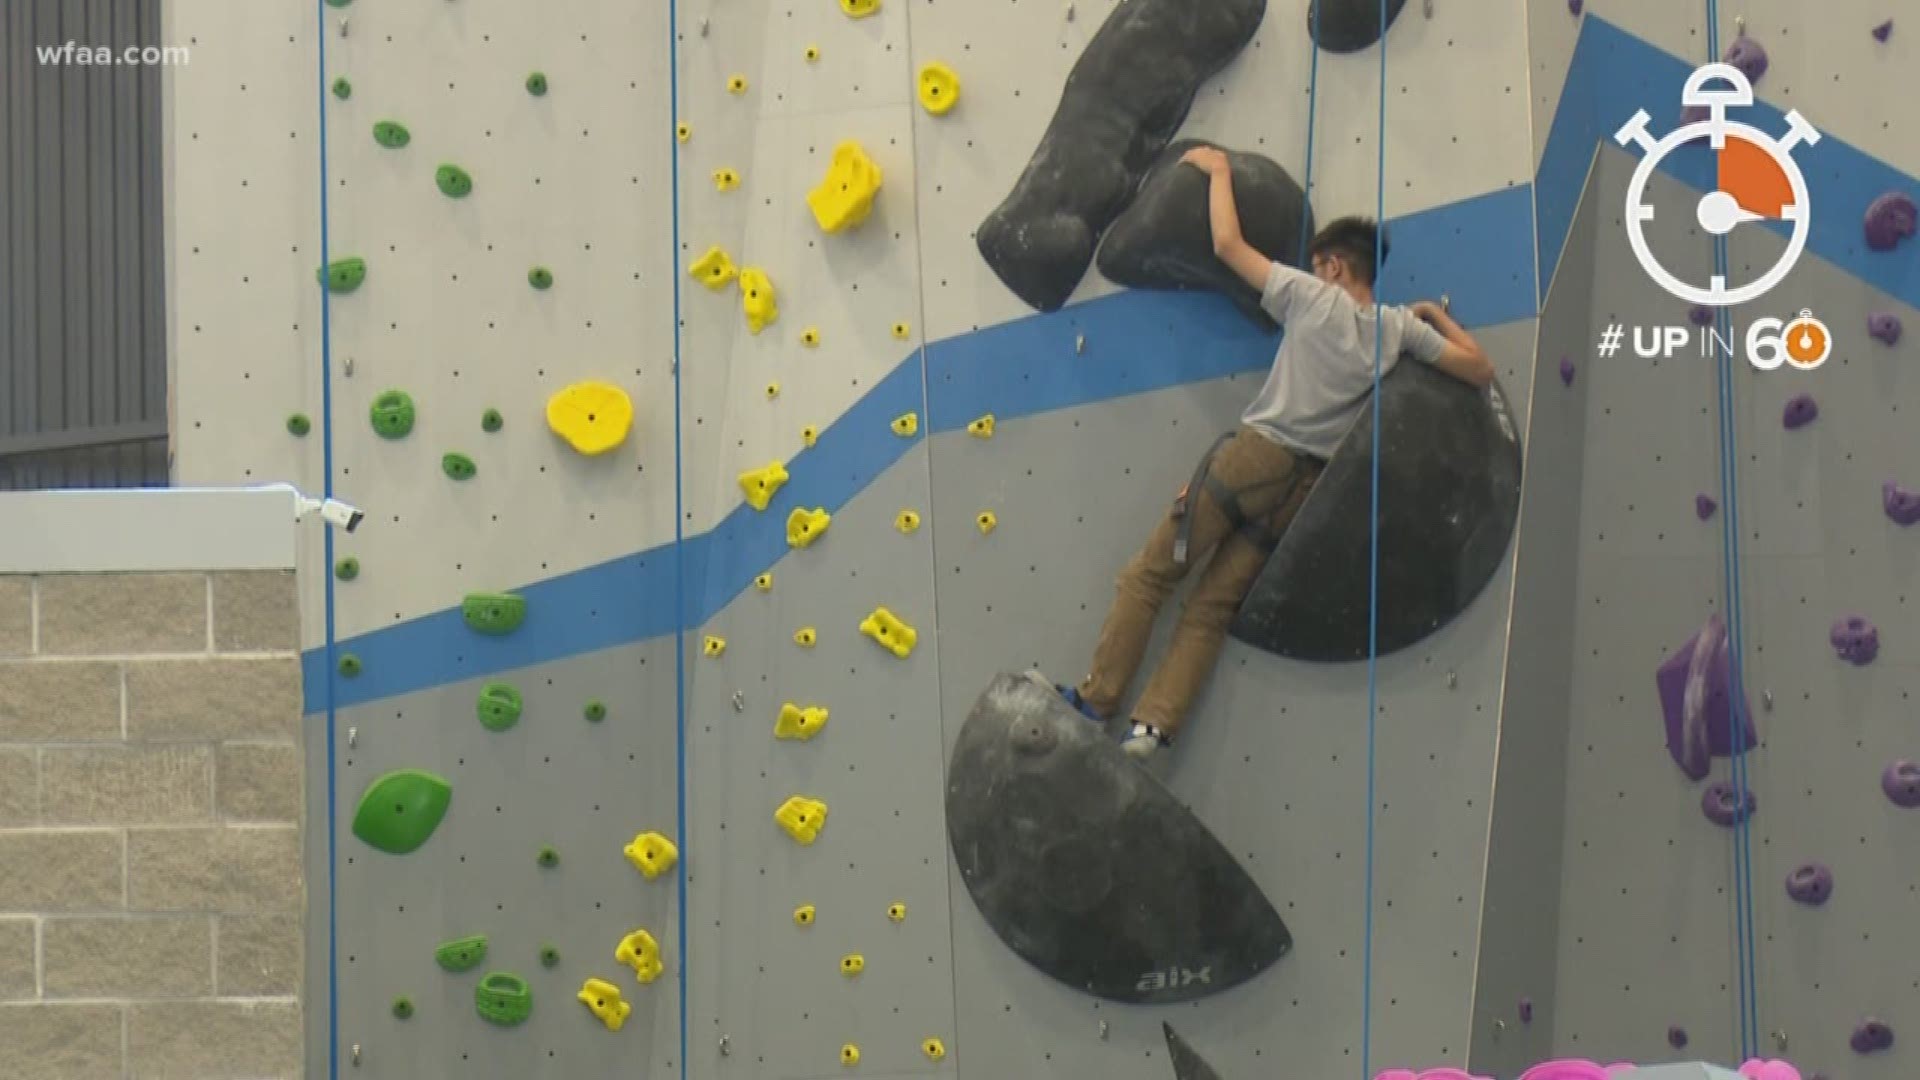 Up in 60: Climbing to new heights in Plano, Summit Climbing Yoga and Fitness